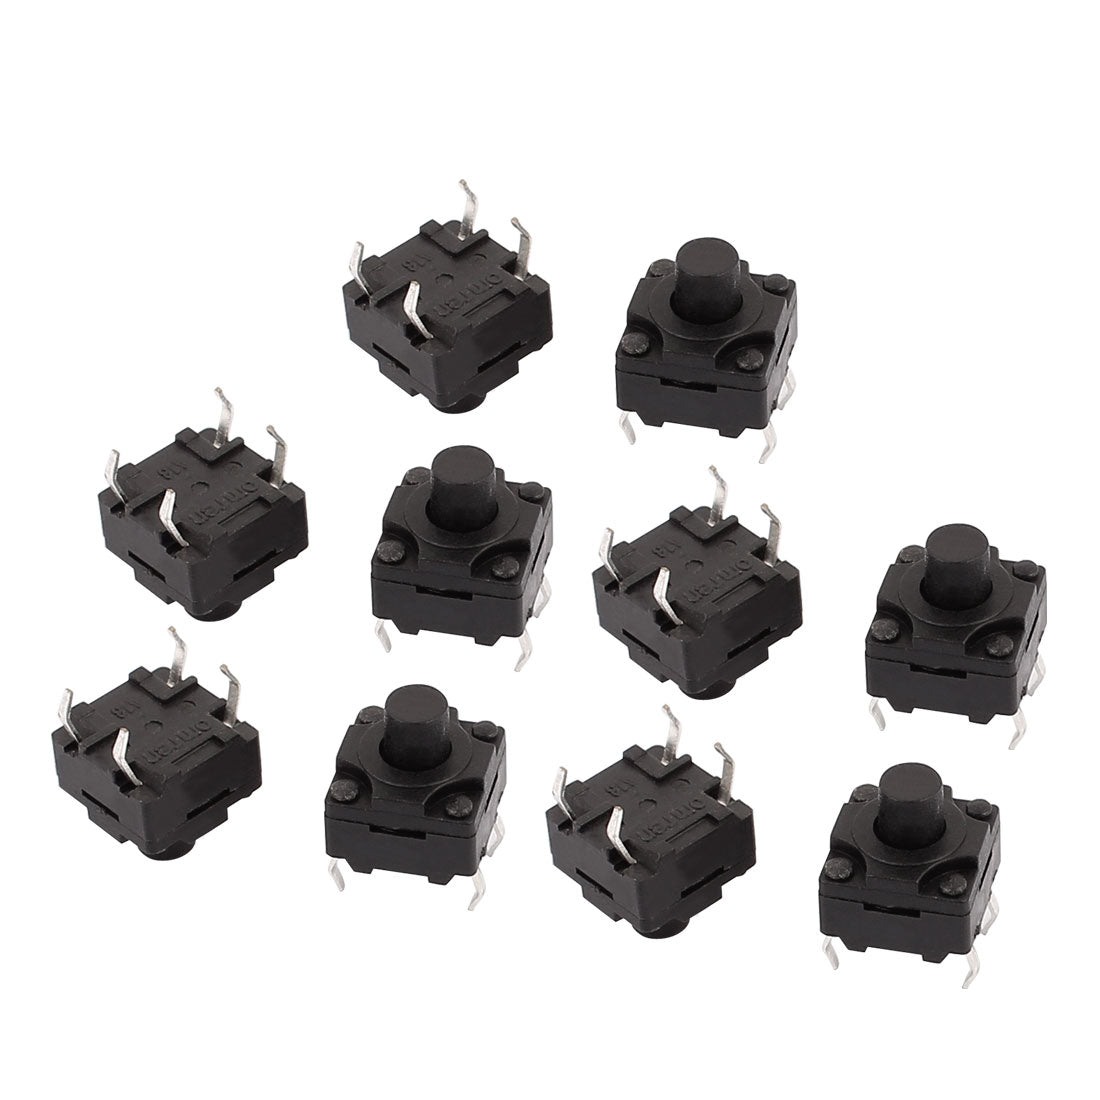 uxcell Uxcell 10Pcs 6mmx6mmx5mm Panel PCB Waterproof Momentary Tactile Tact Push Button Switch 4 Pin DIP